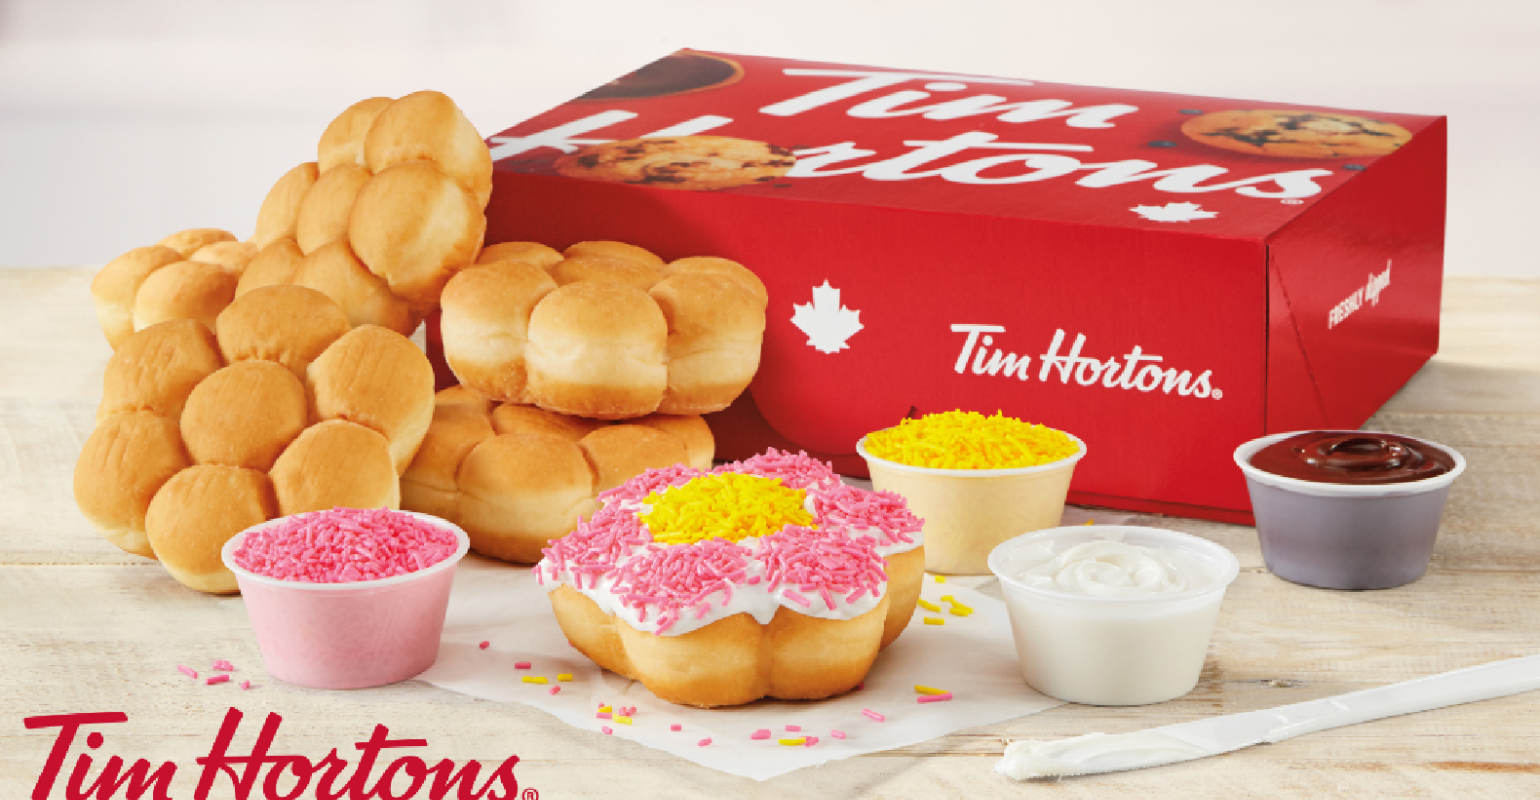 Tim Hortons releases donut to benefit local healthcare workers